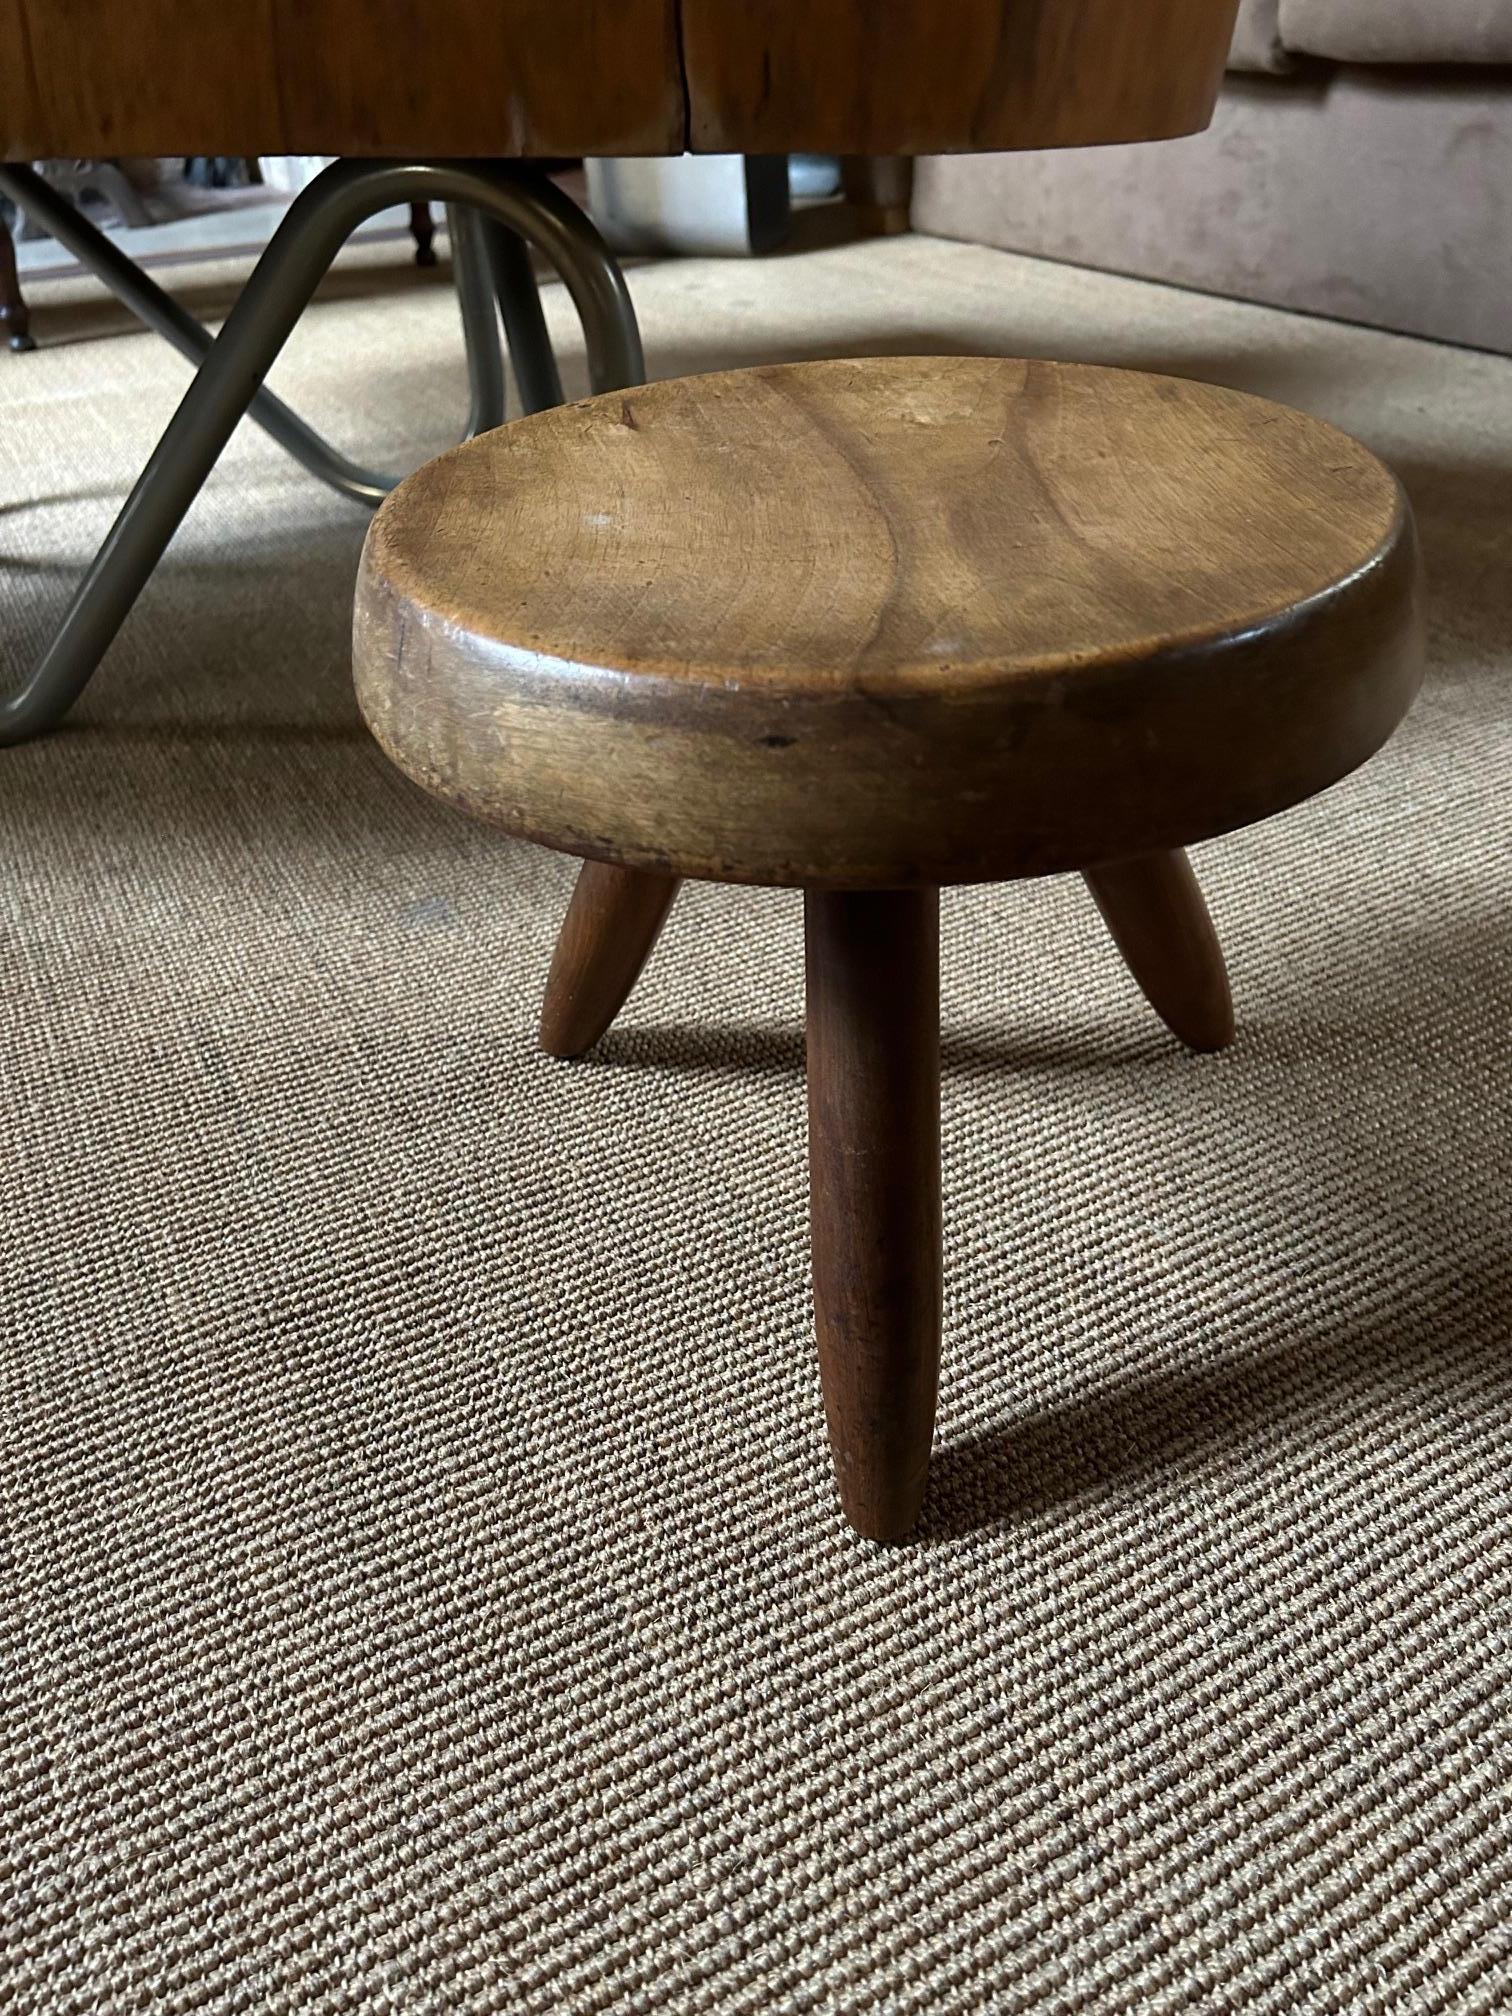 Mahogany Berger stool by Charlotte Perriand For Sale 4